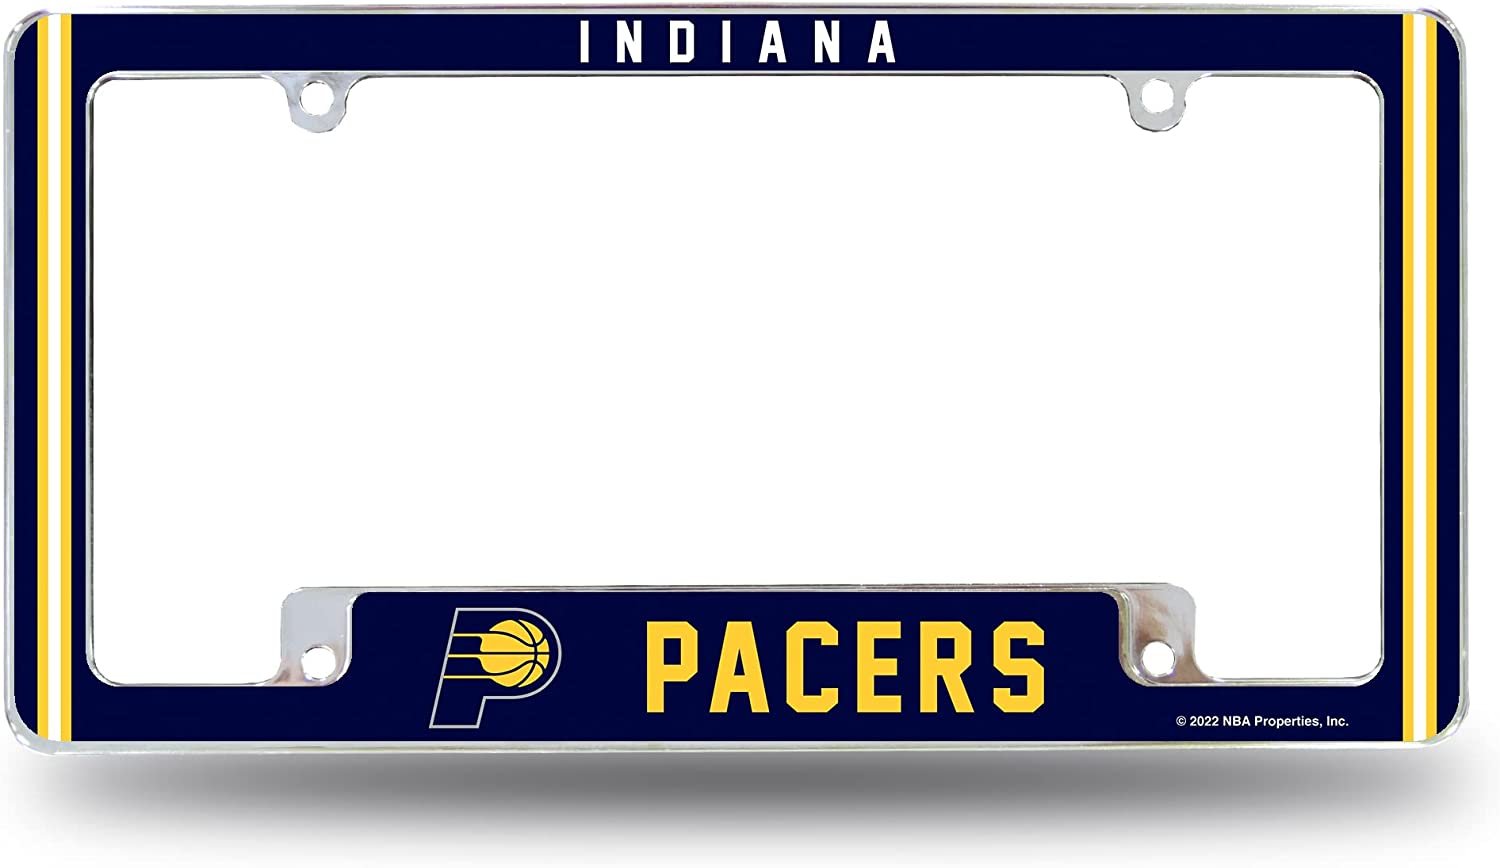 Indiana Pacers Metal License Plate Frame Chrome Tag Cover Alternate Design 6x12 Inch